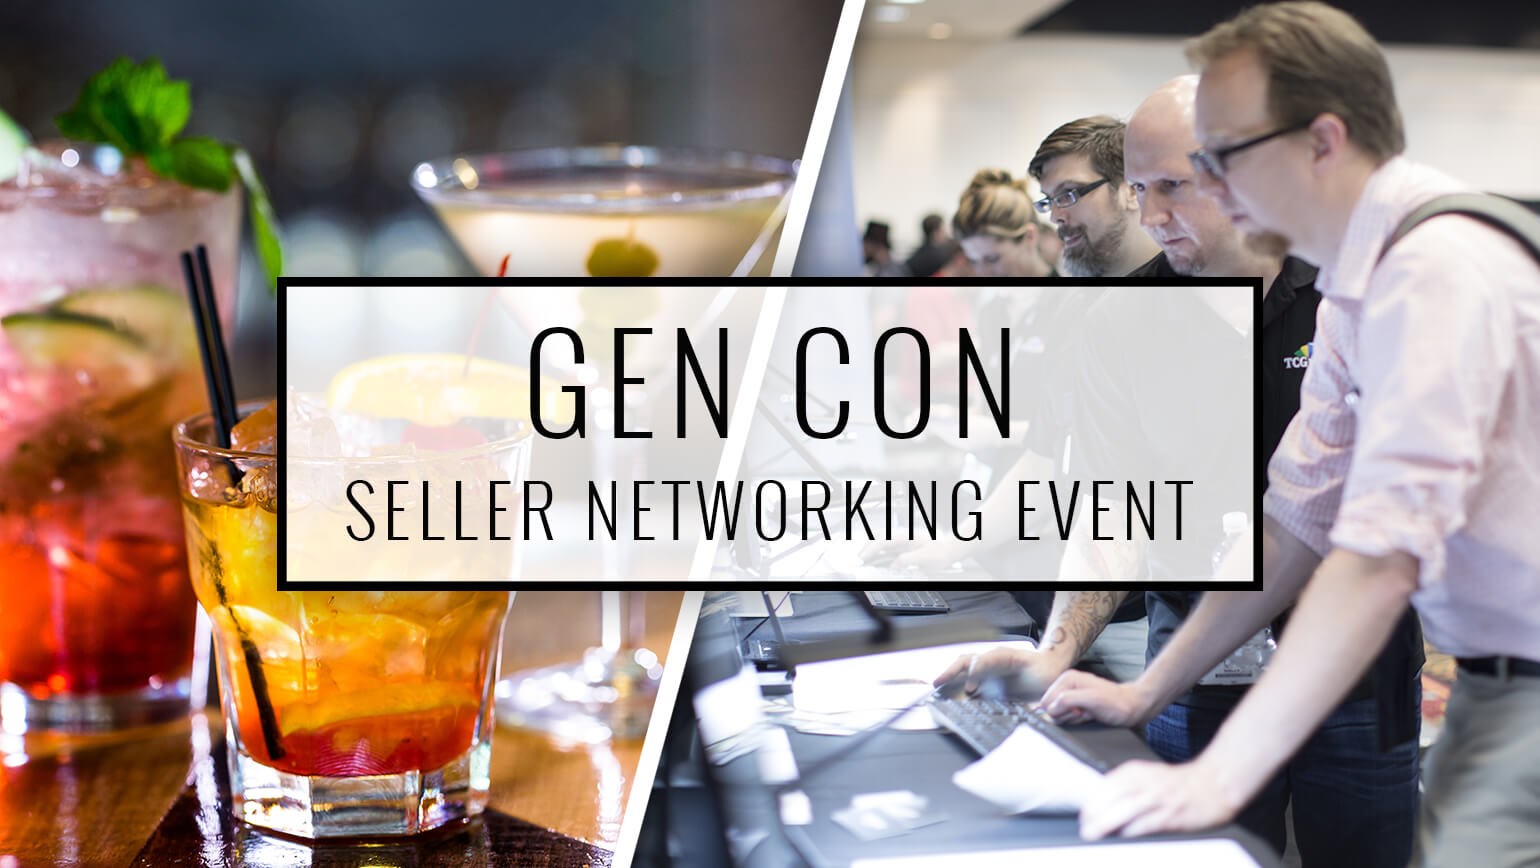 Join Us at Gen Con for an Exclusive Opportunity